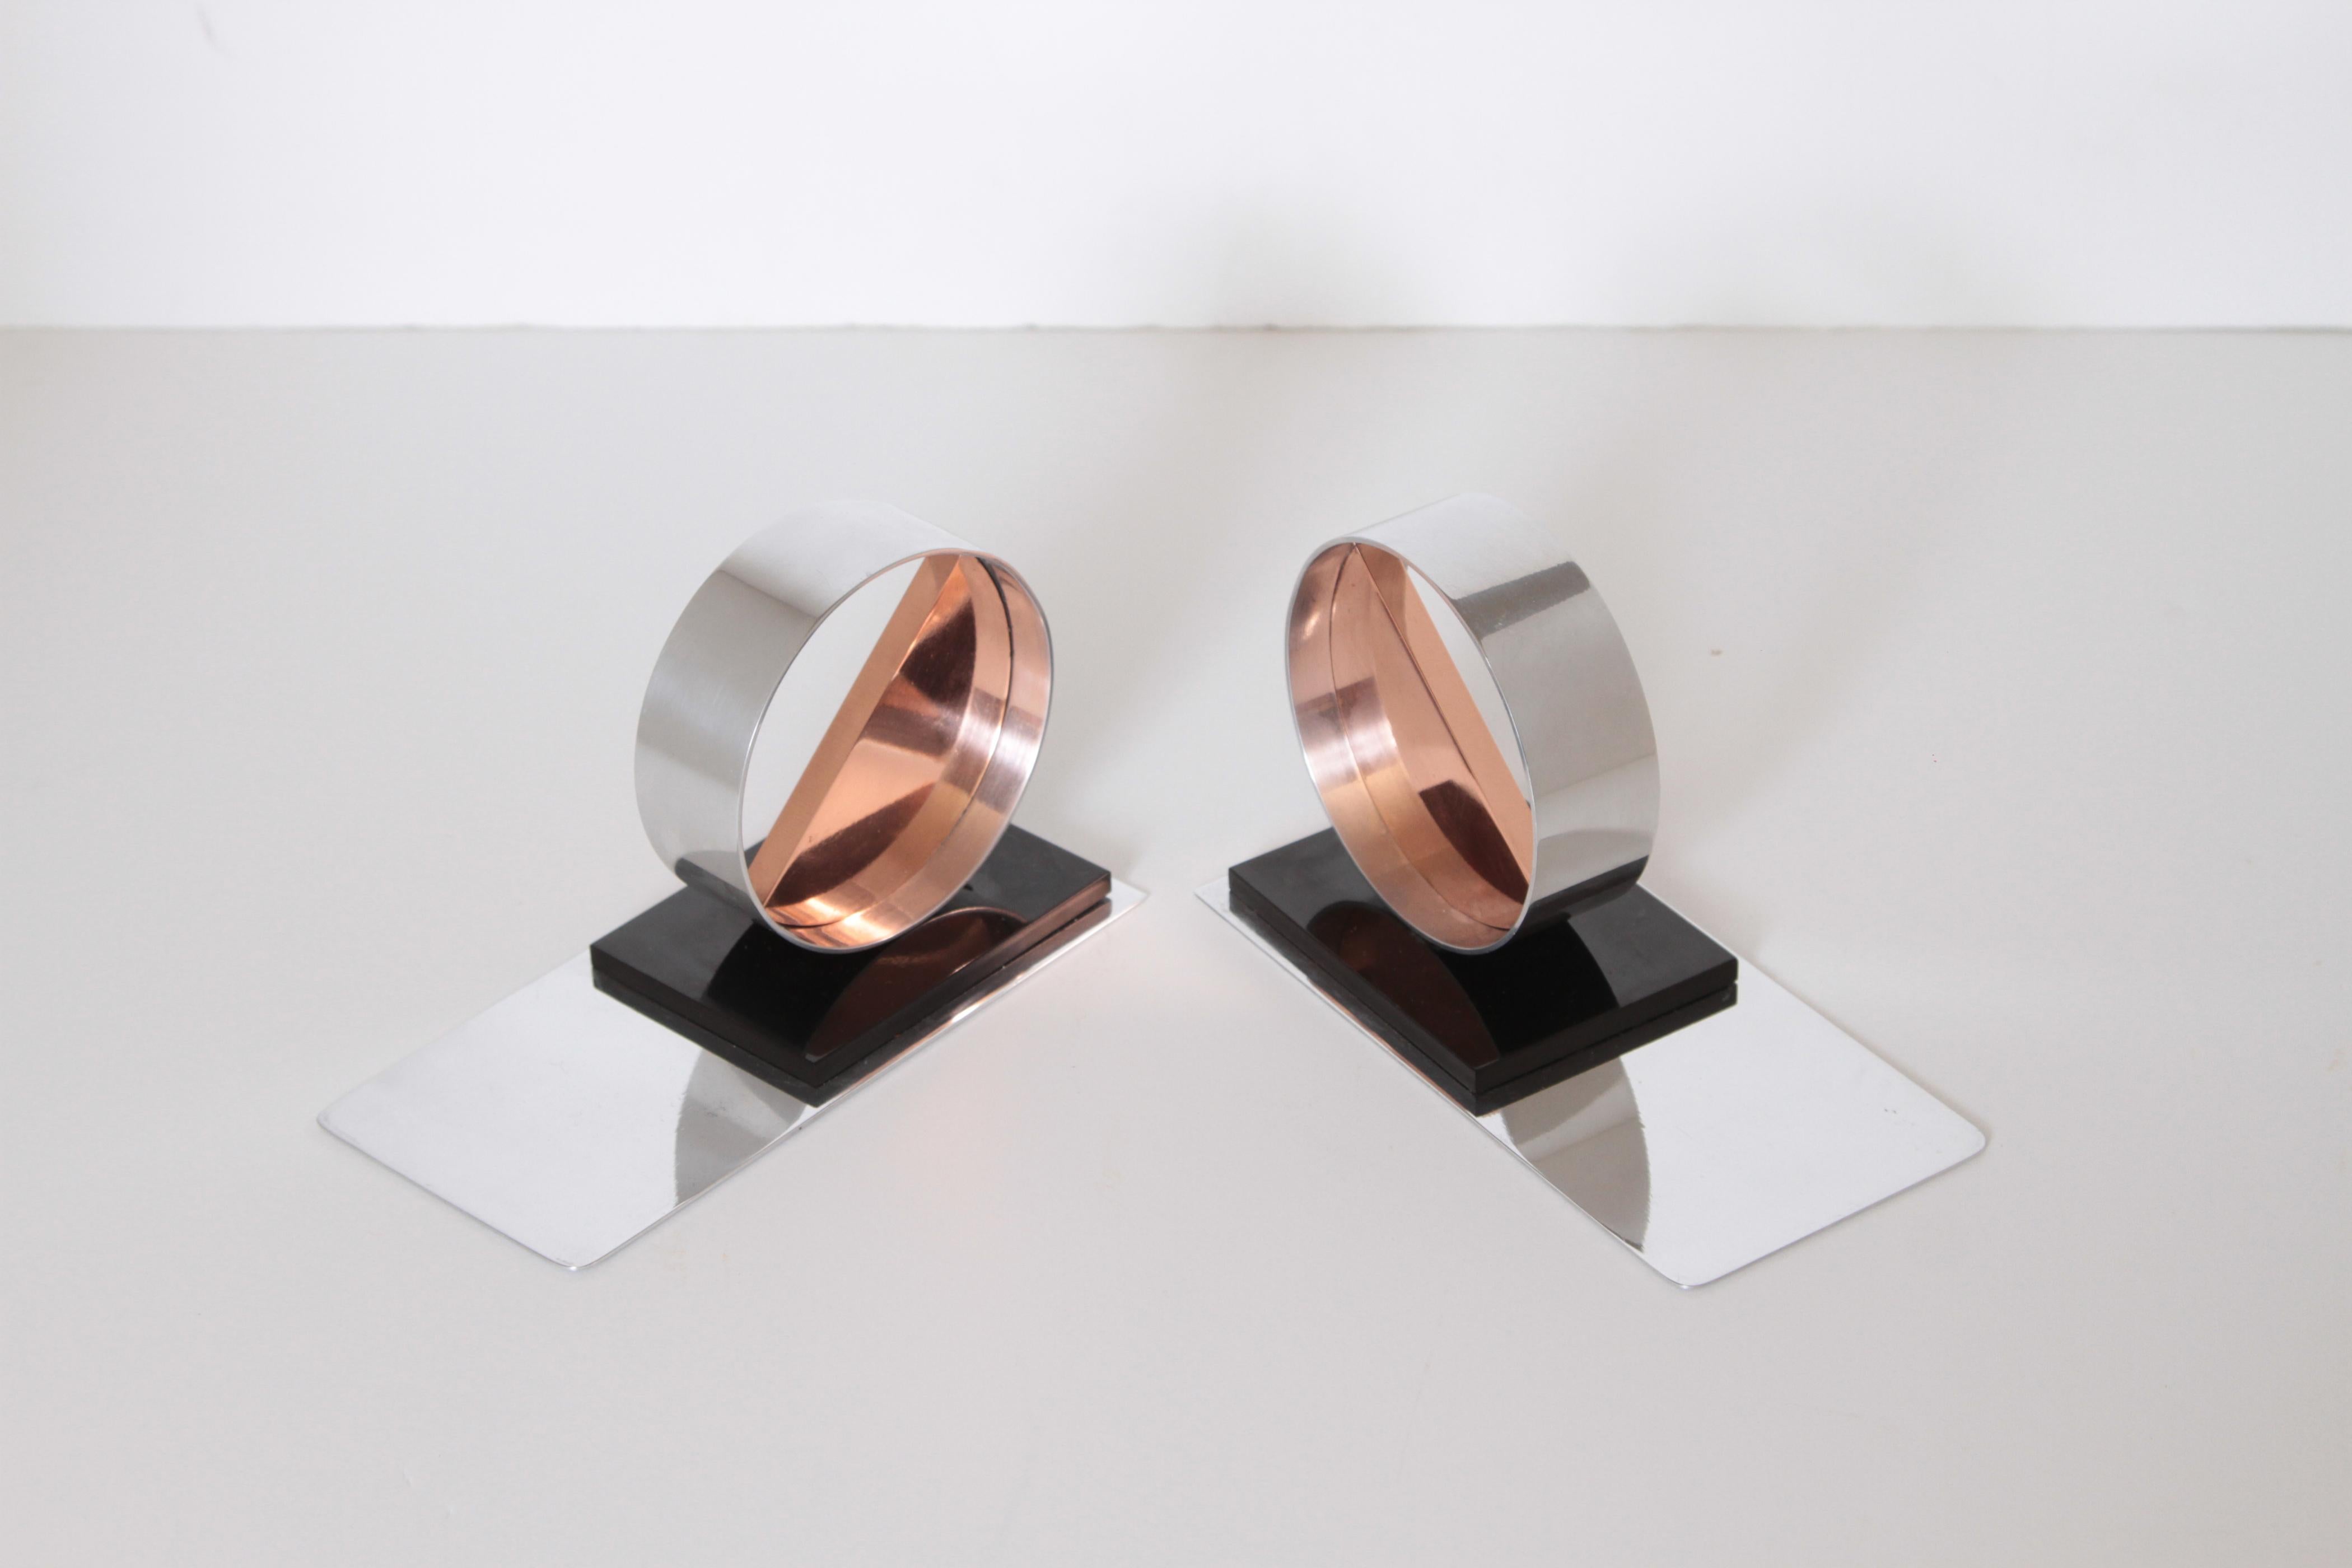 Modernist Machine Age Art Deco Sculptures / Bookends Pair Copper Chrome Bakelite In Good Condition For Sale In Dallas, TX